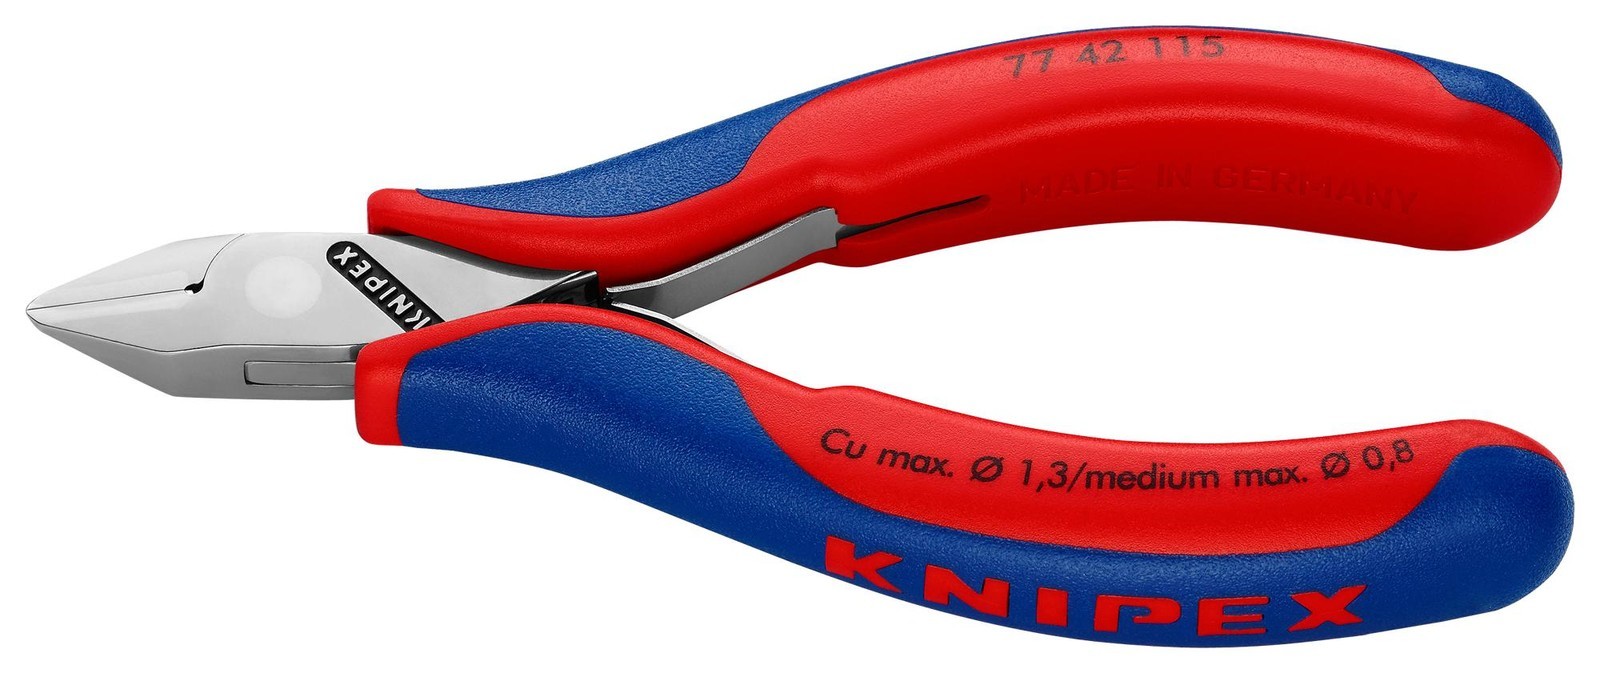 Knipex 77 42 115 Cutter, Red Handles